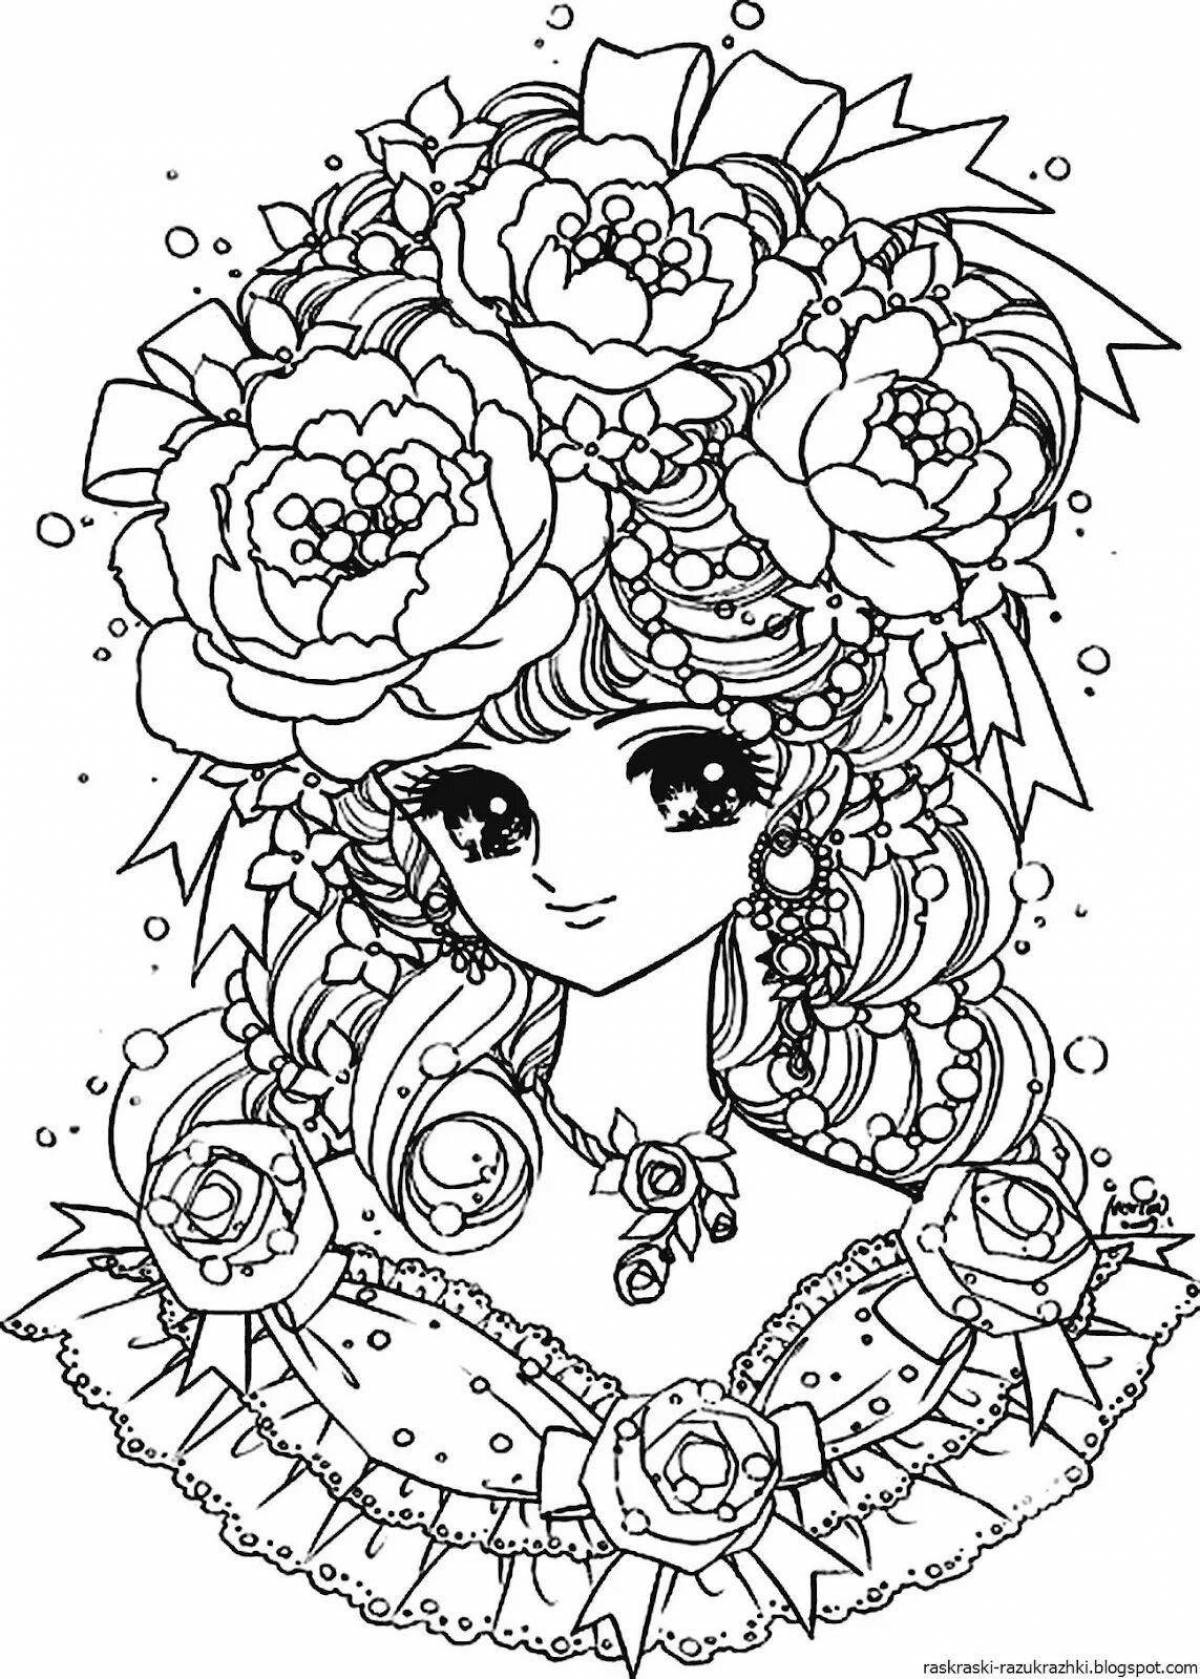 Cute coloring book for girls 9 10